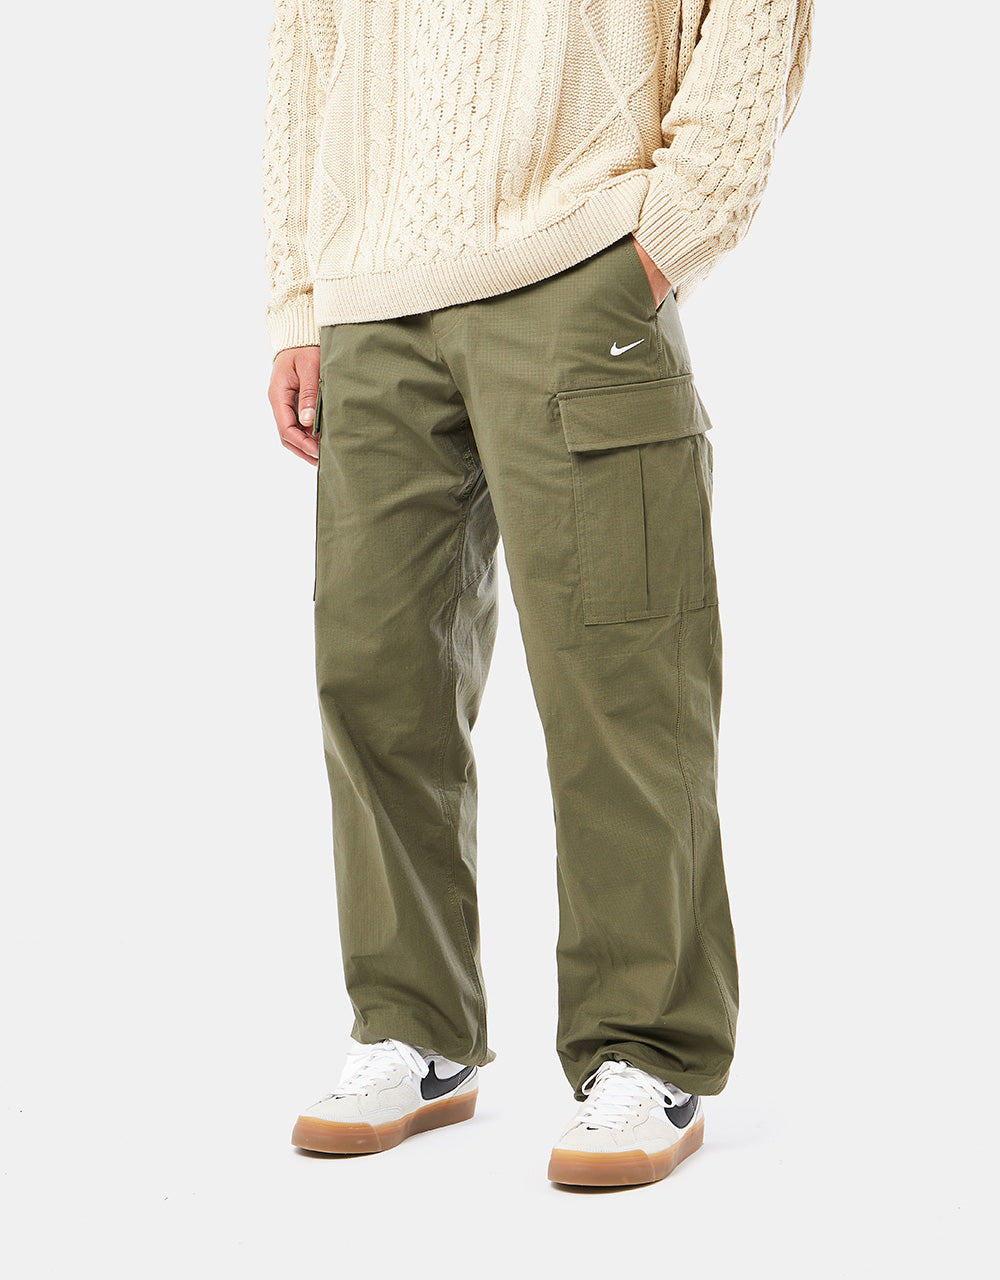 Cargo pants: the trousers of 2022?